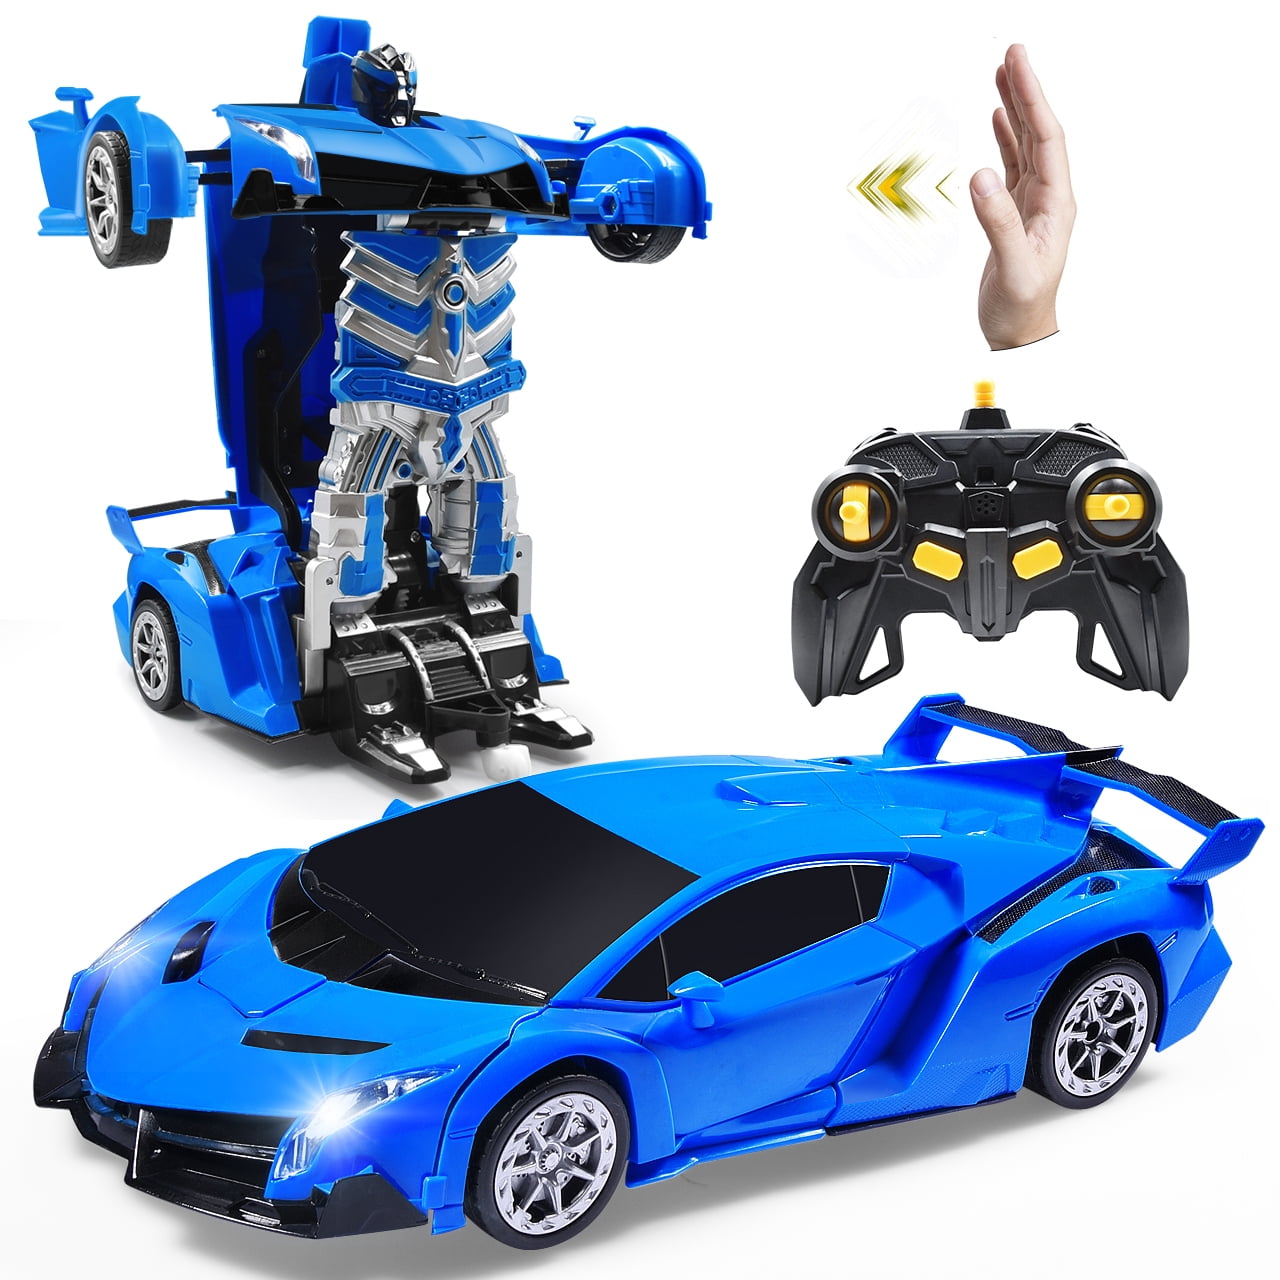 Details about   2 in 1 Robot Race Car Construction Game Toy Gift Model Building Set Kids Boy 